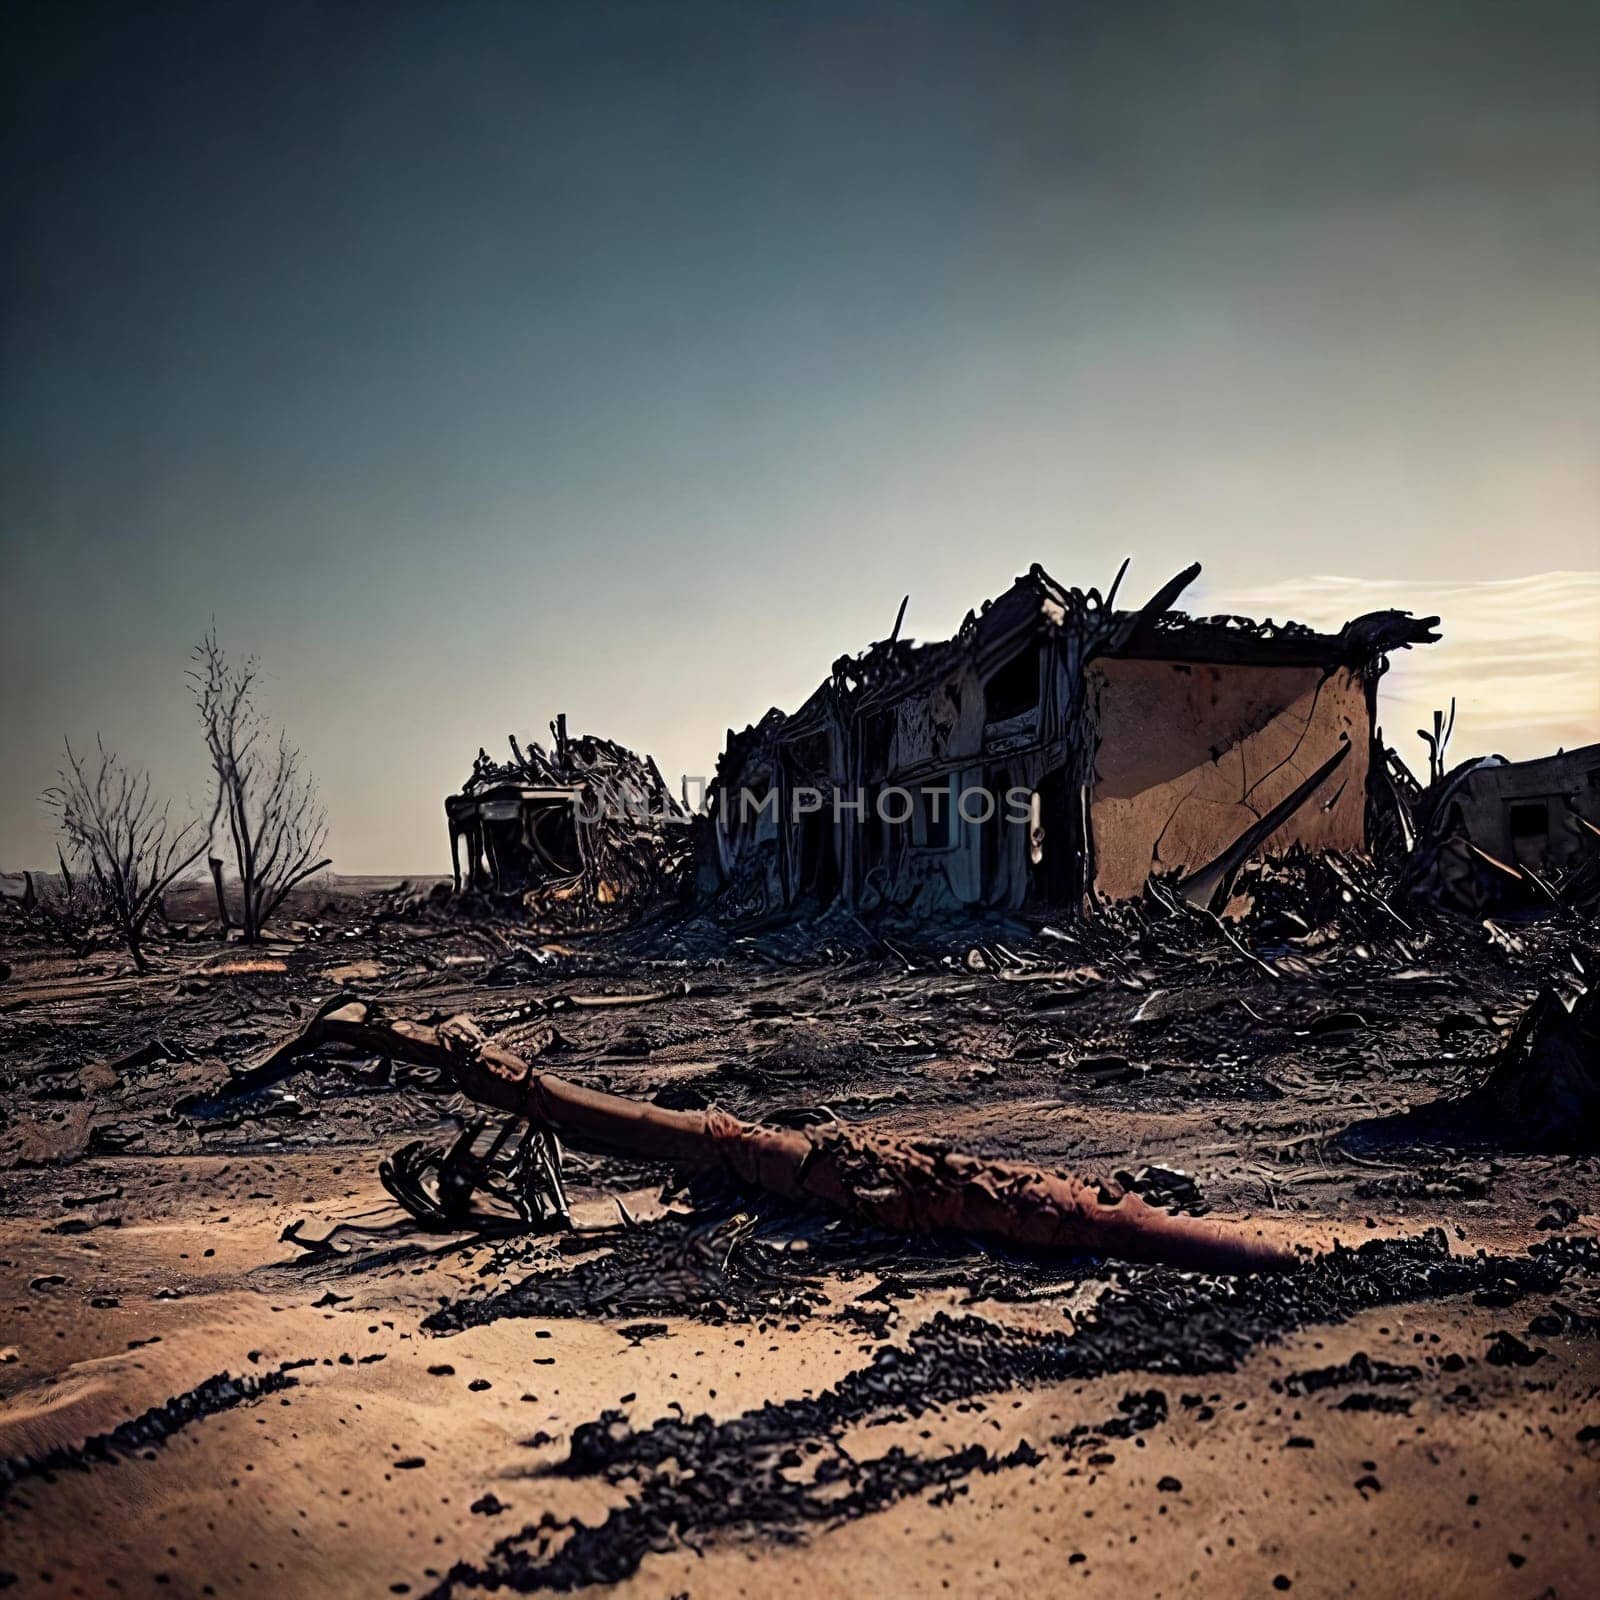 Devastated Landscapes. Disaster with scorched earth, smoldering wreckage, and a bleak atmosphere that conveys the destruction that occurred.